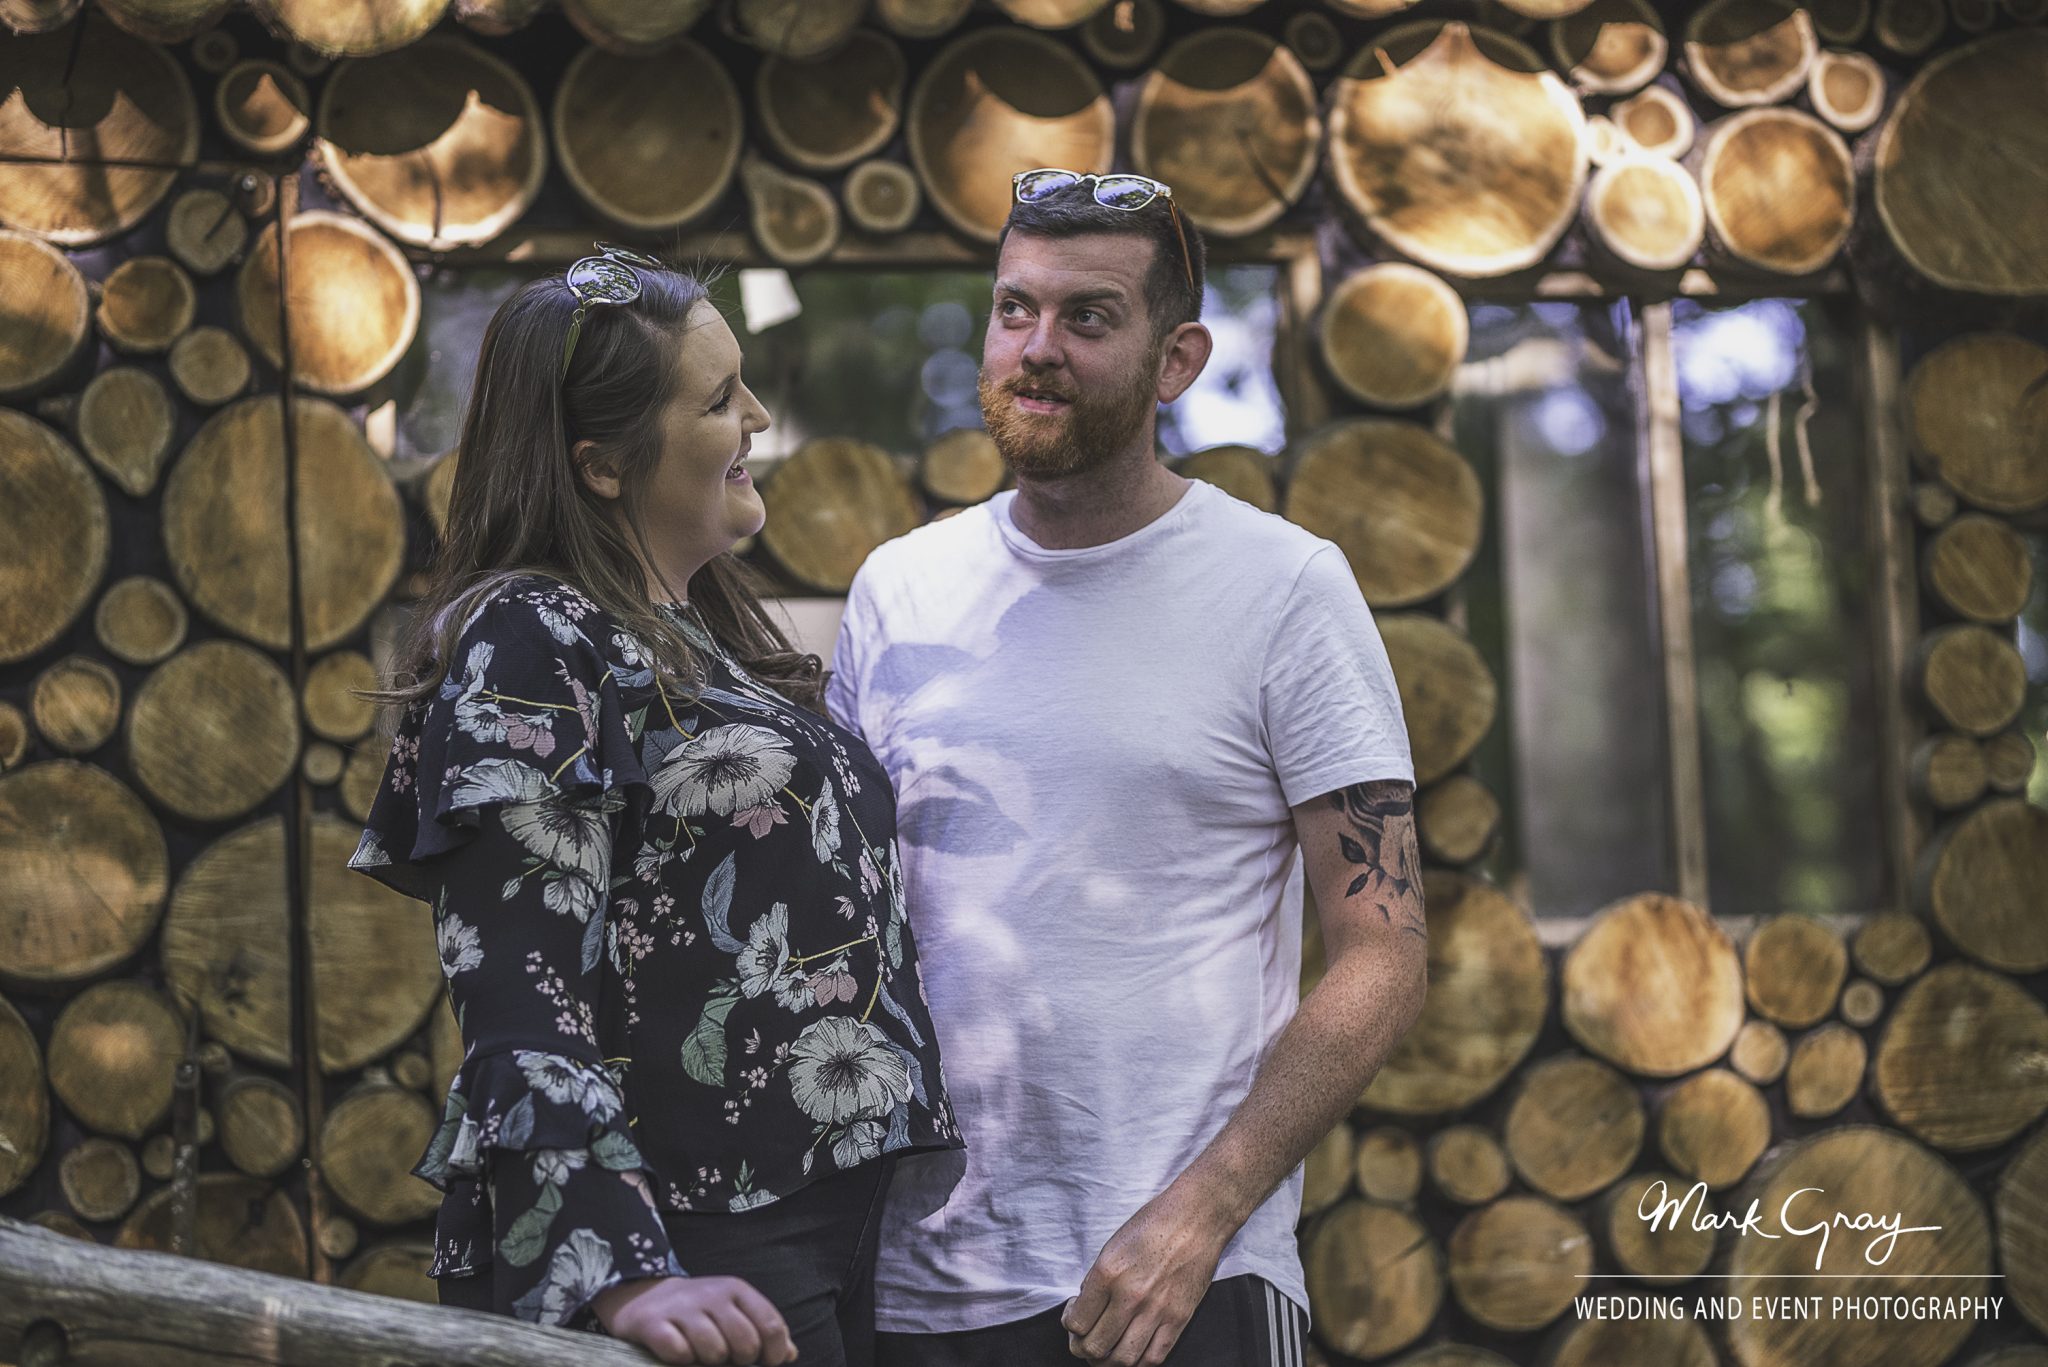 Engaged couple outside the woodcutters hut at the Dreys wedding and event venue